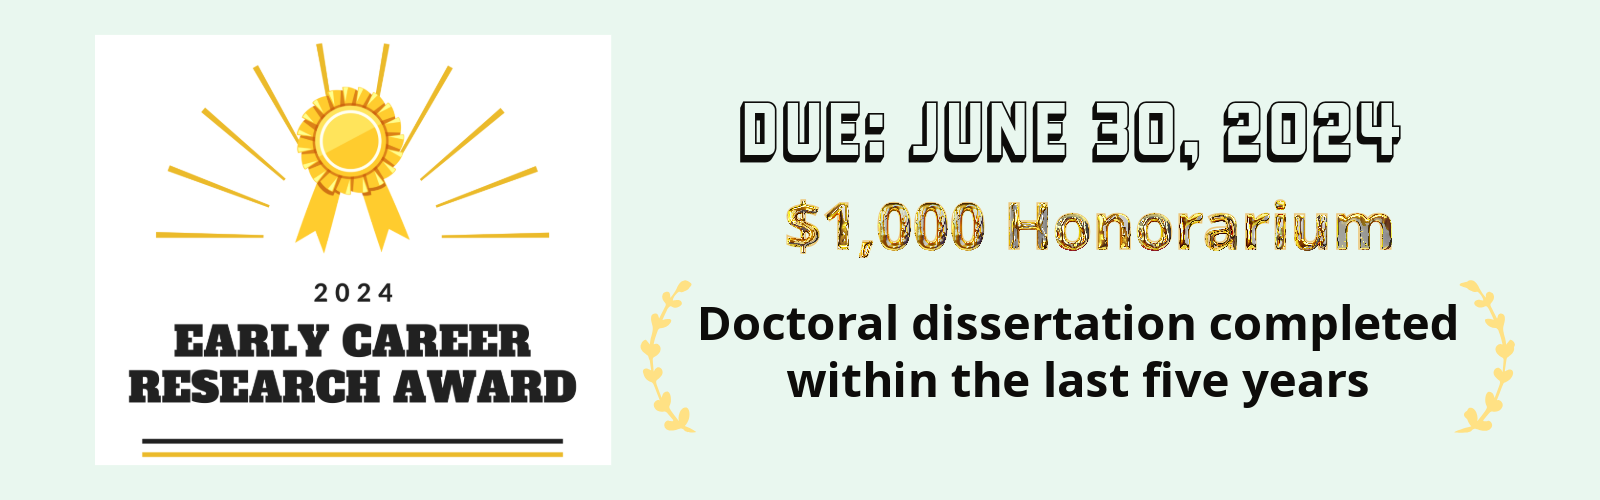 2024 Early Career Research Award are due by June 30, 2024. Award: $1,000 honorarium Doctoral disseratation within the five years